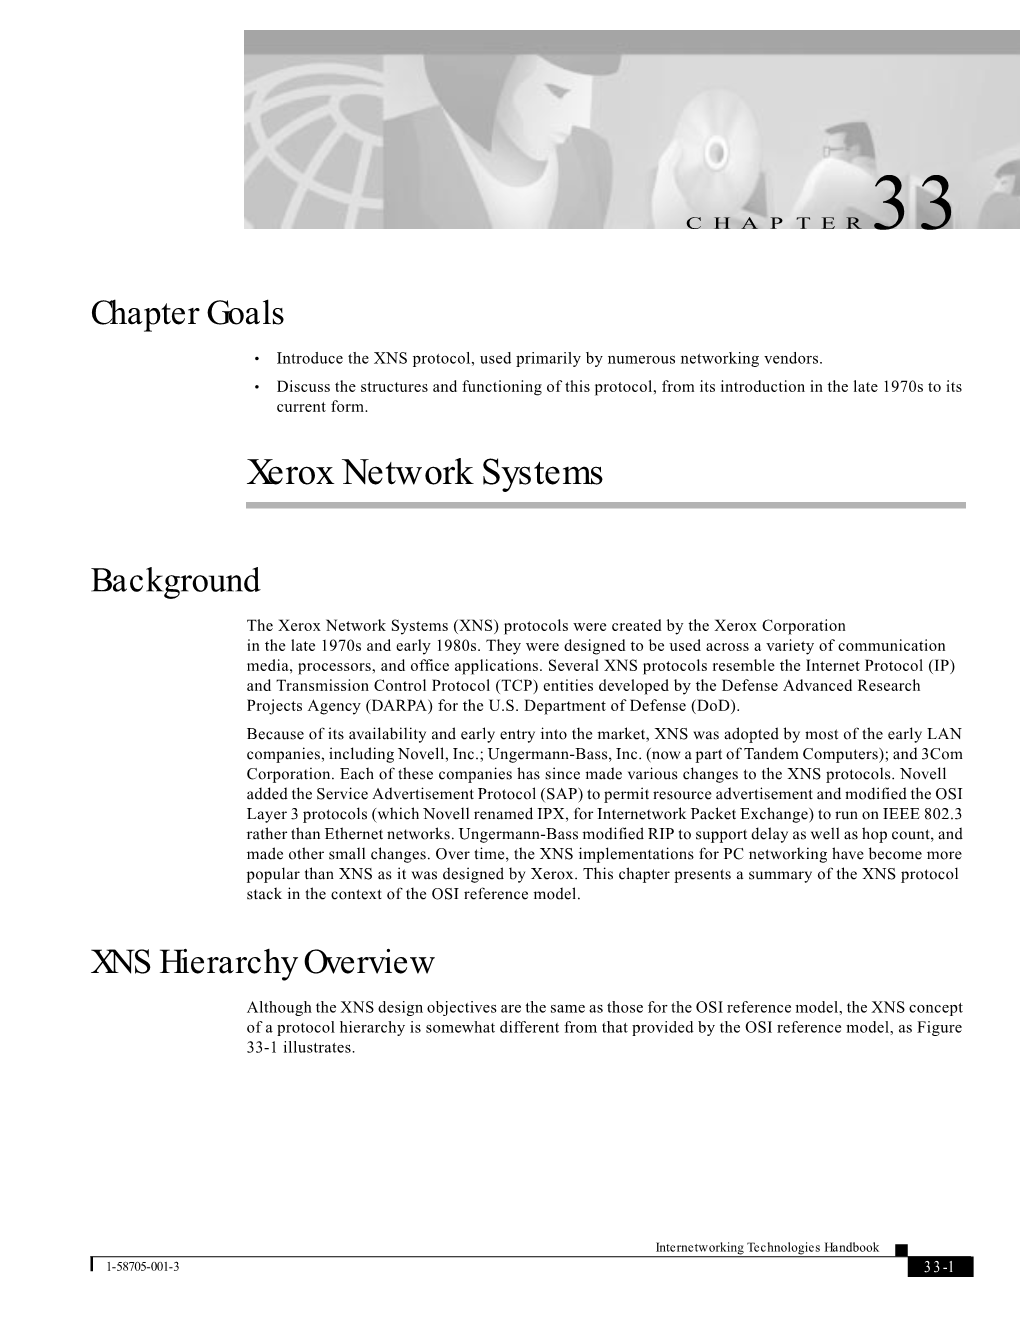 Xerox Network Systems